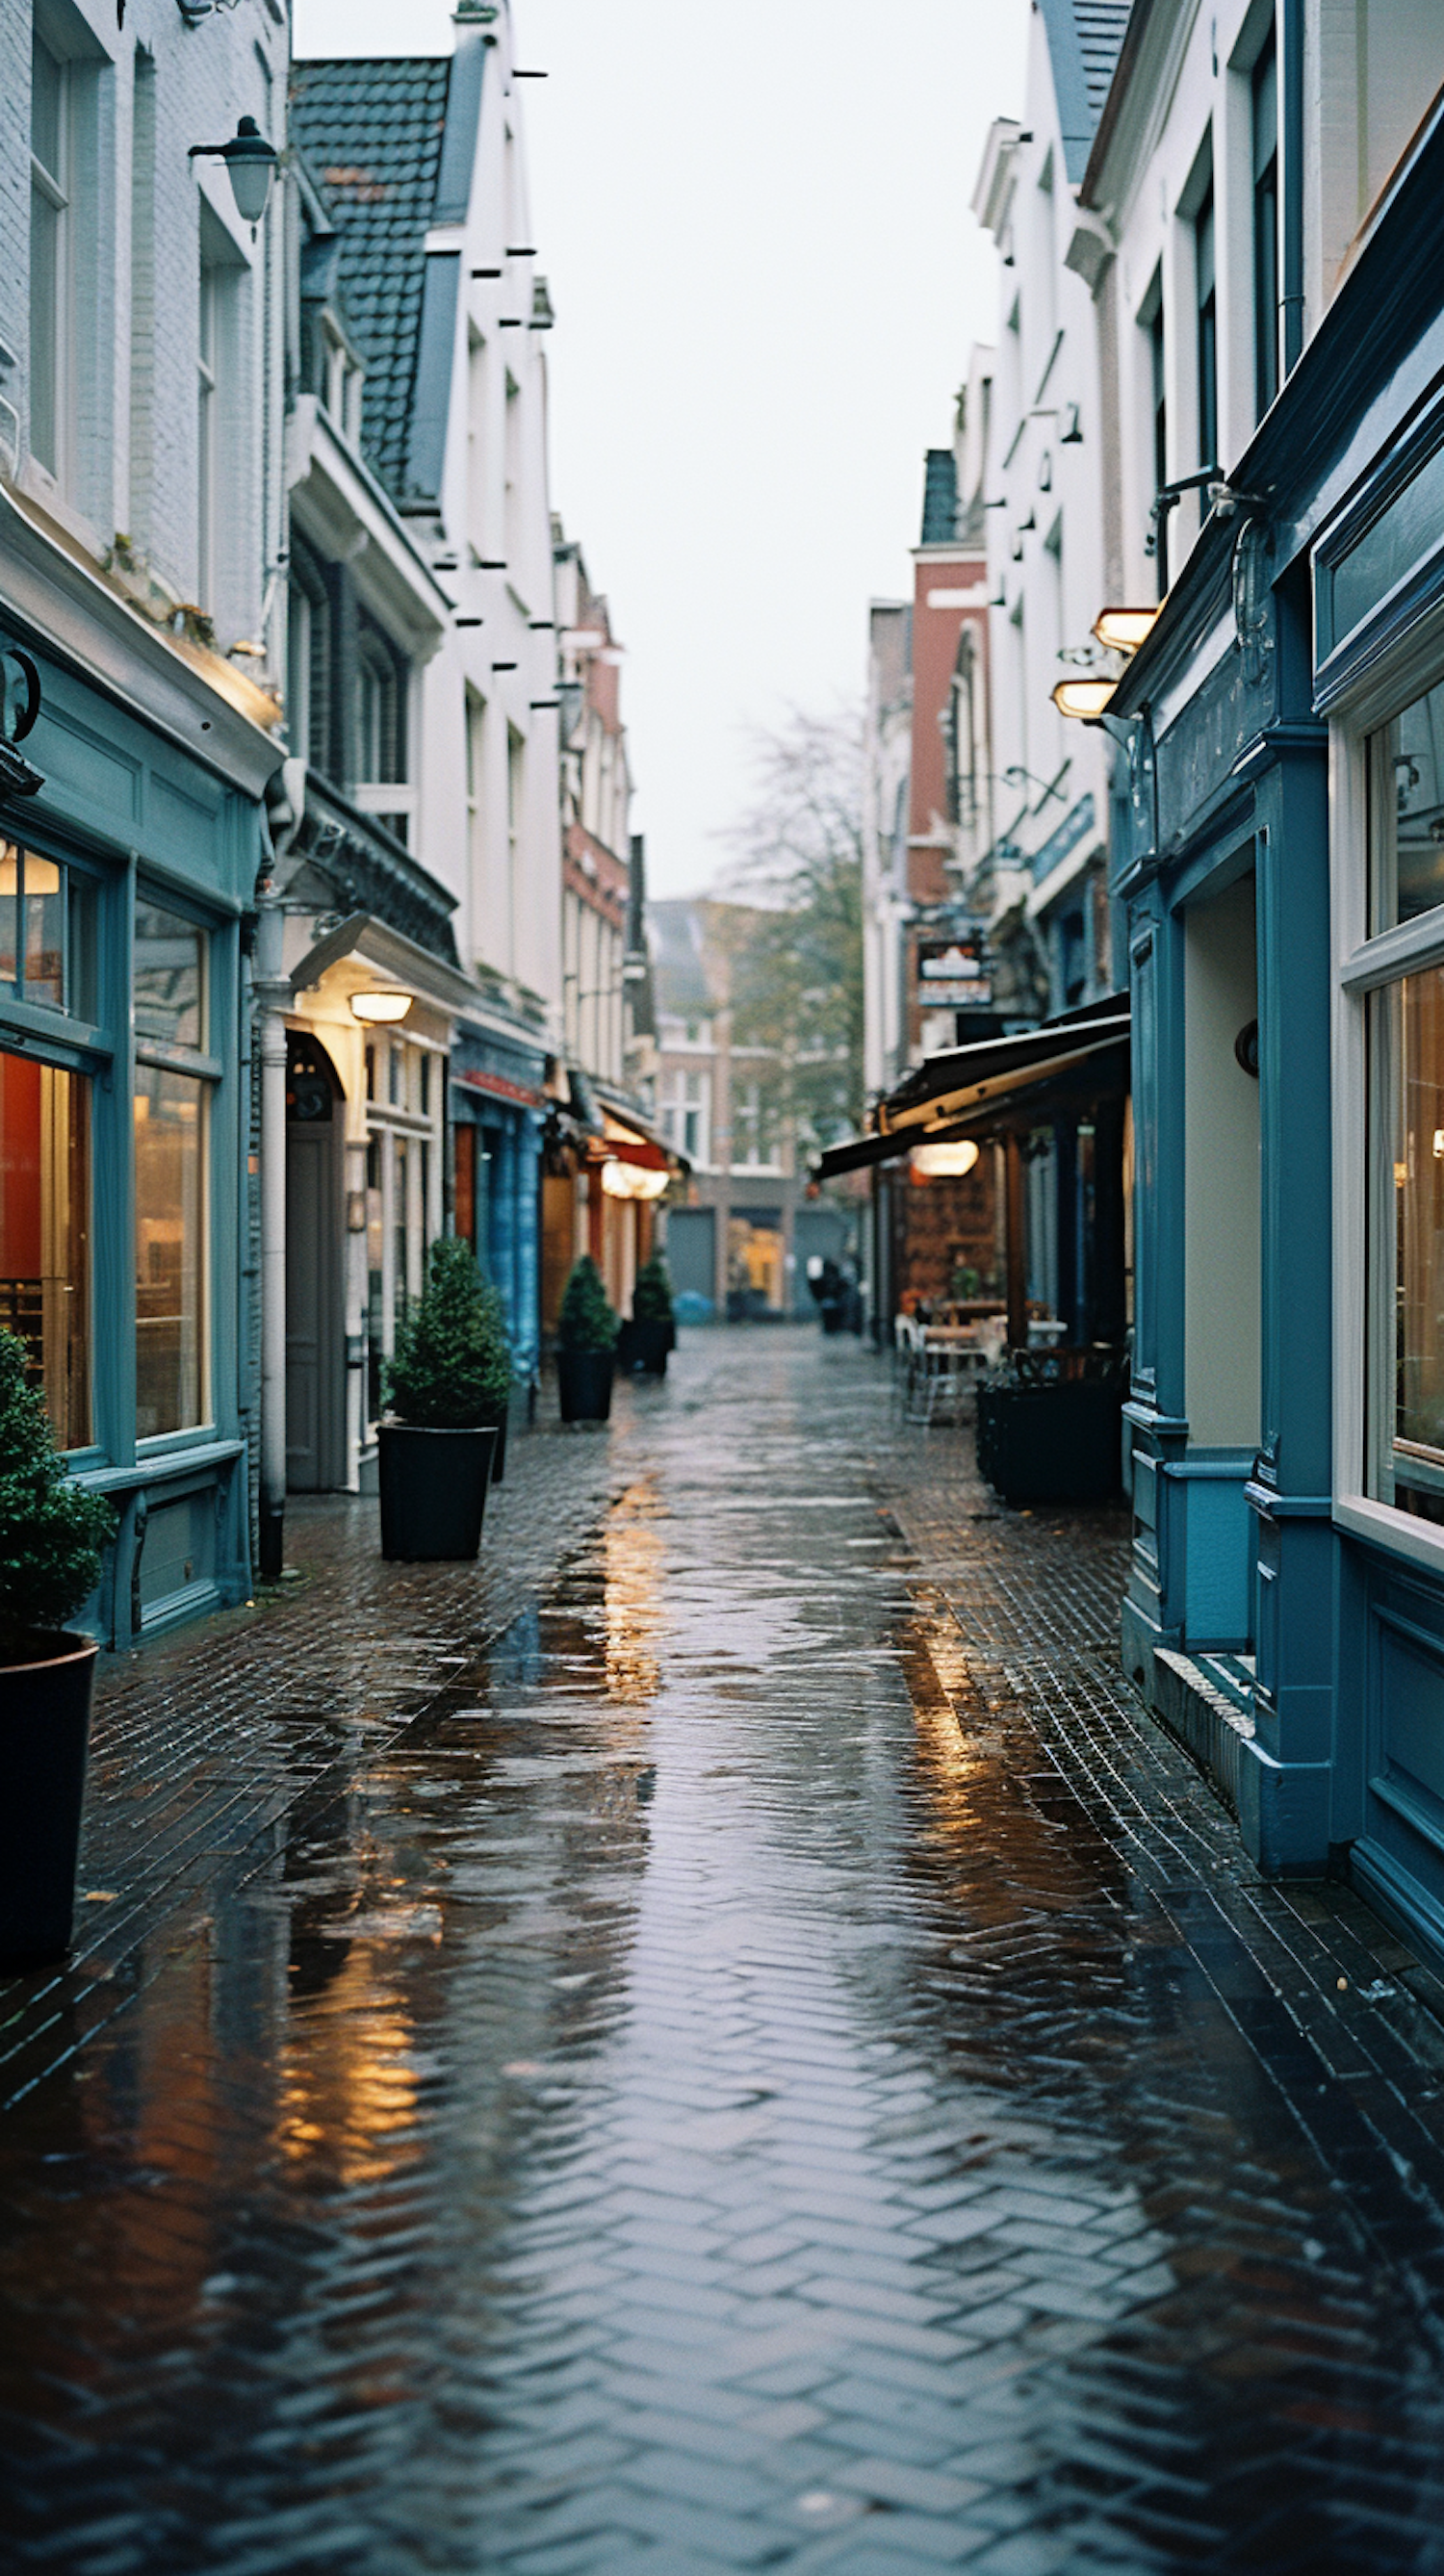 Rain-Soaked Cobblestone Street with Dutch-Inspired Architecture